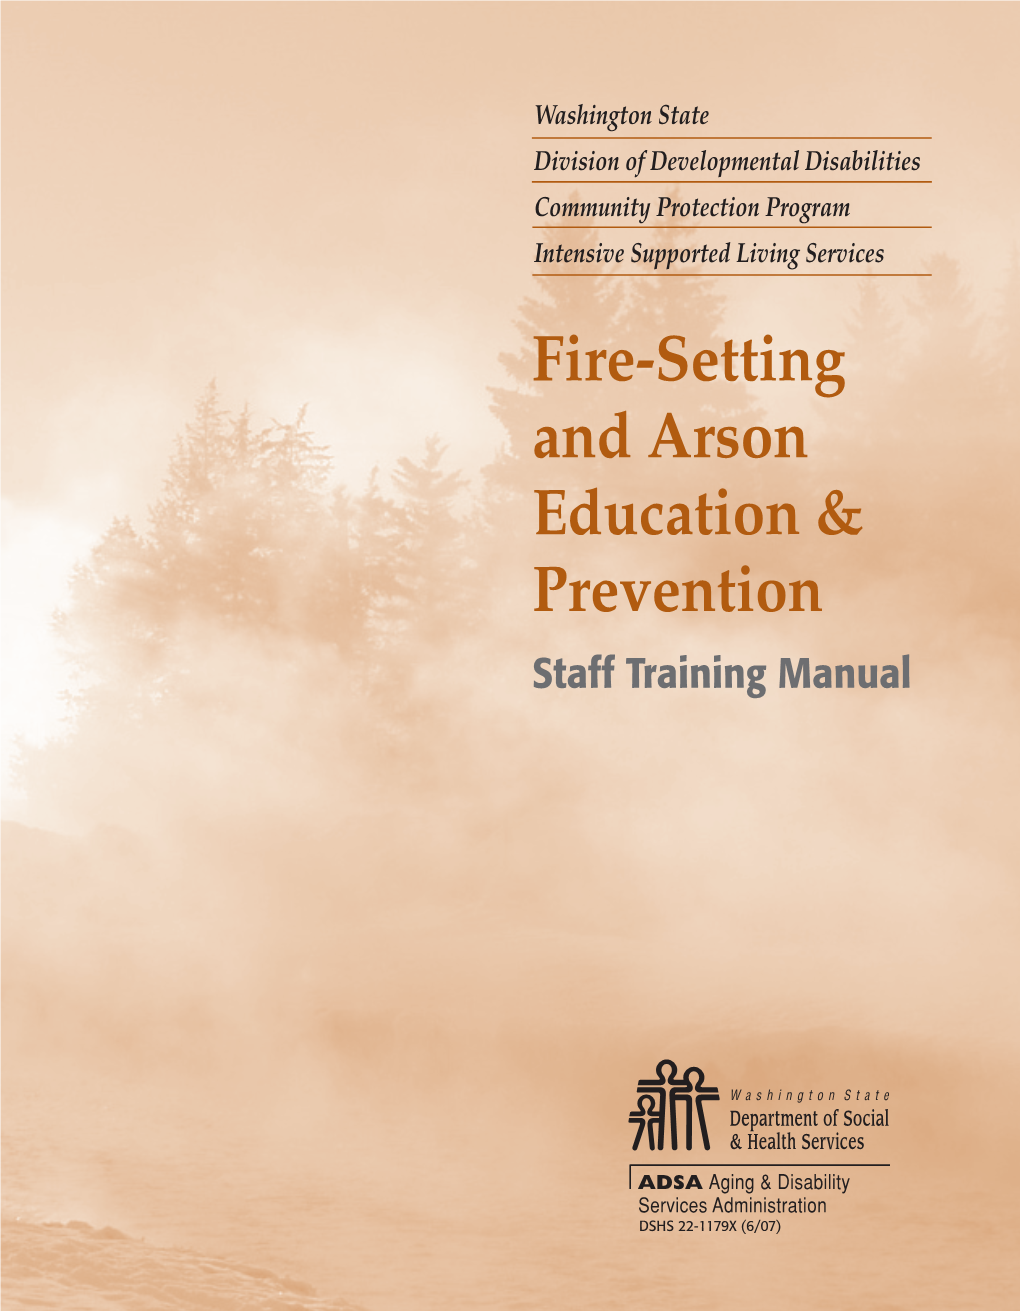 Fire-Setting and Arson Education & Prevention